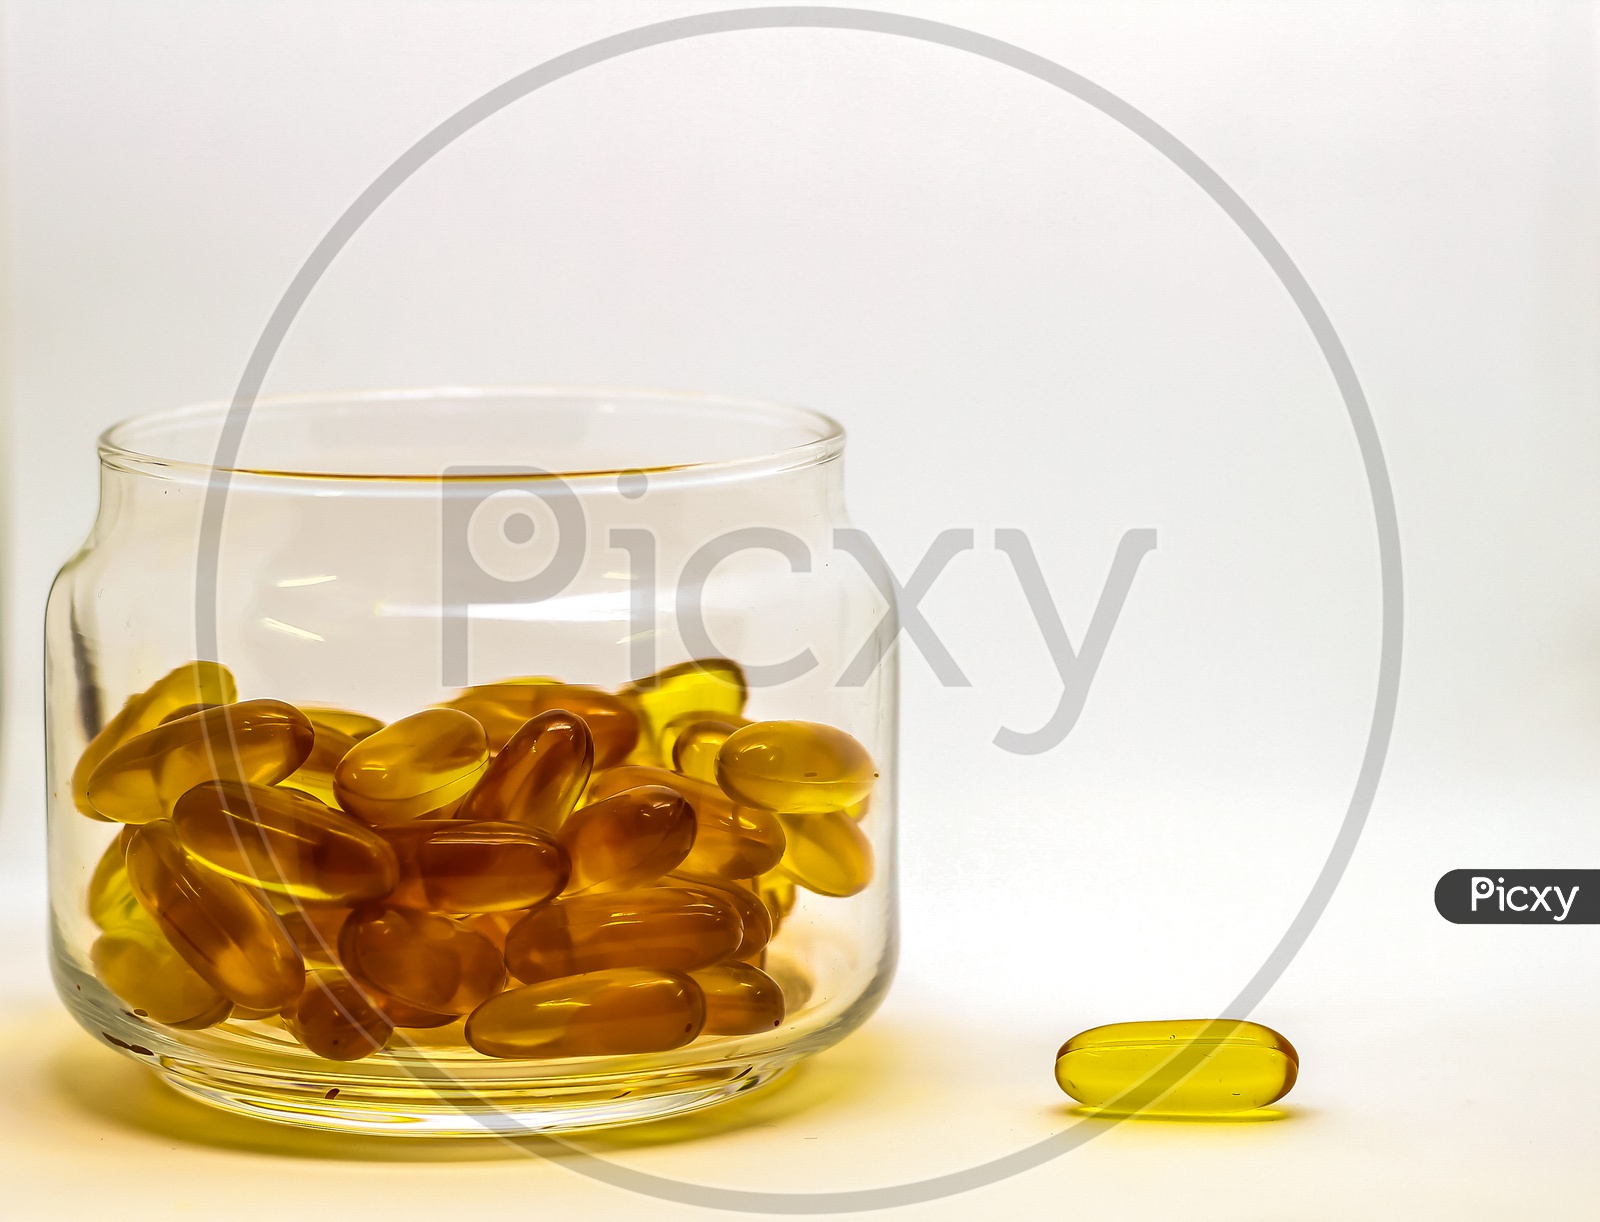 Cod Liver Oil Omega 3 Vitamin E Gel Capsules Isolated On White Background In A Transparent Glass Bottle